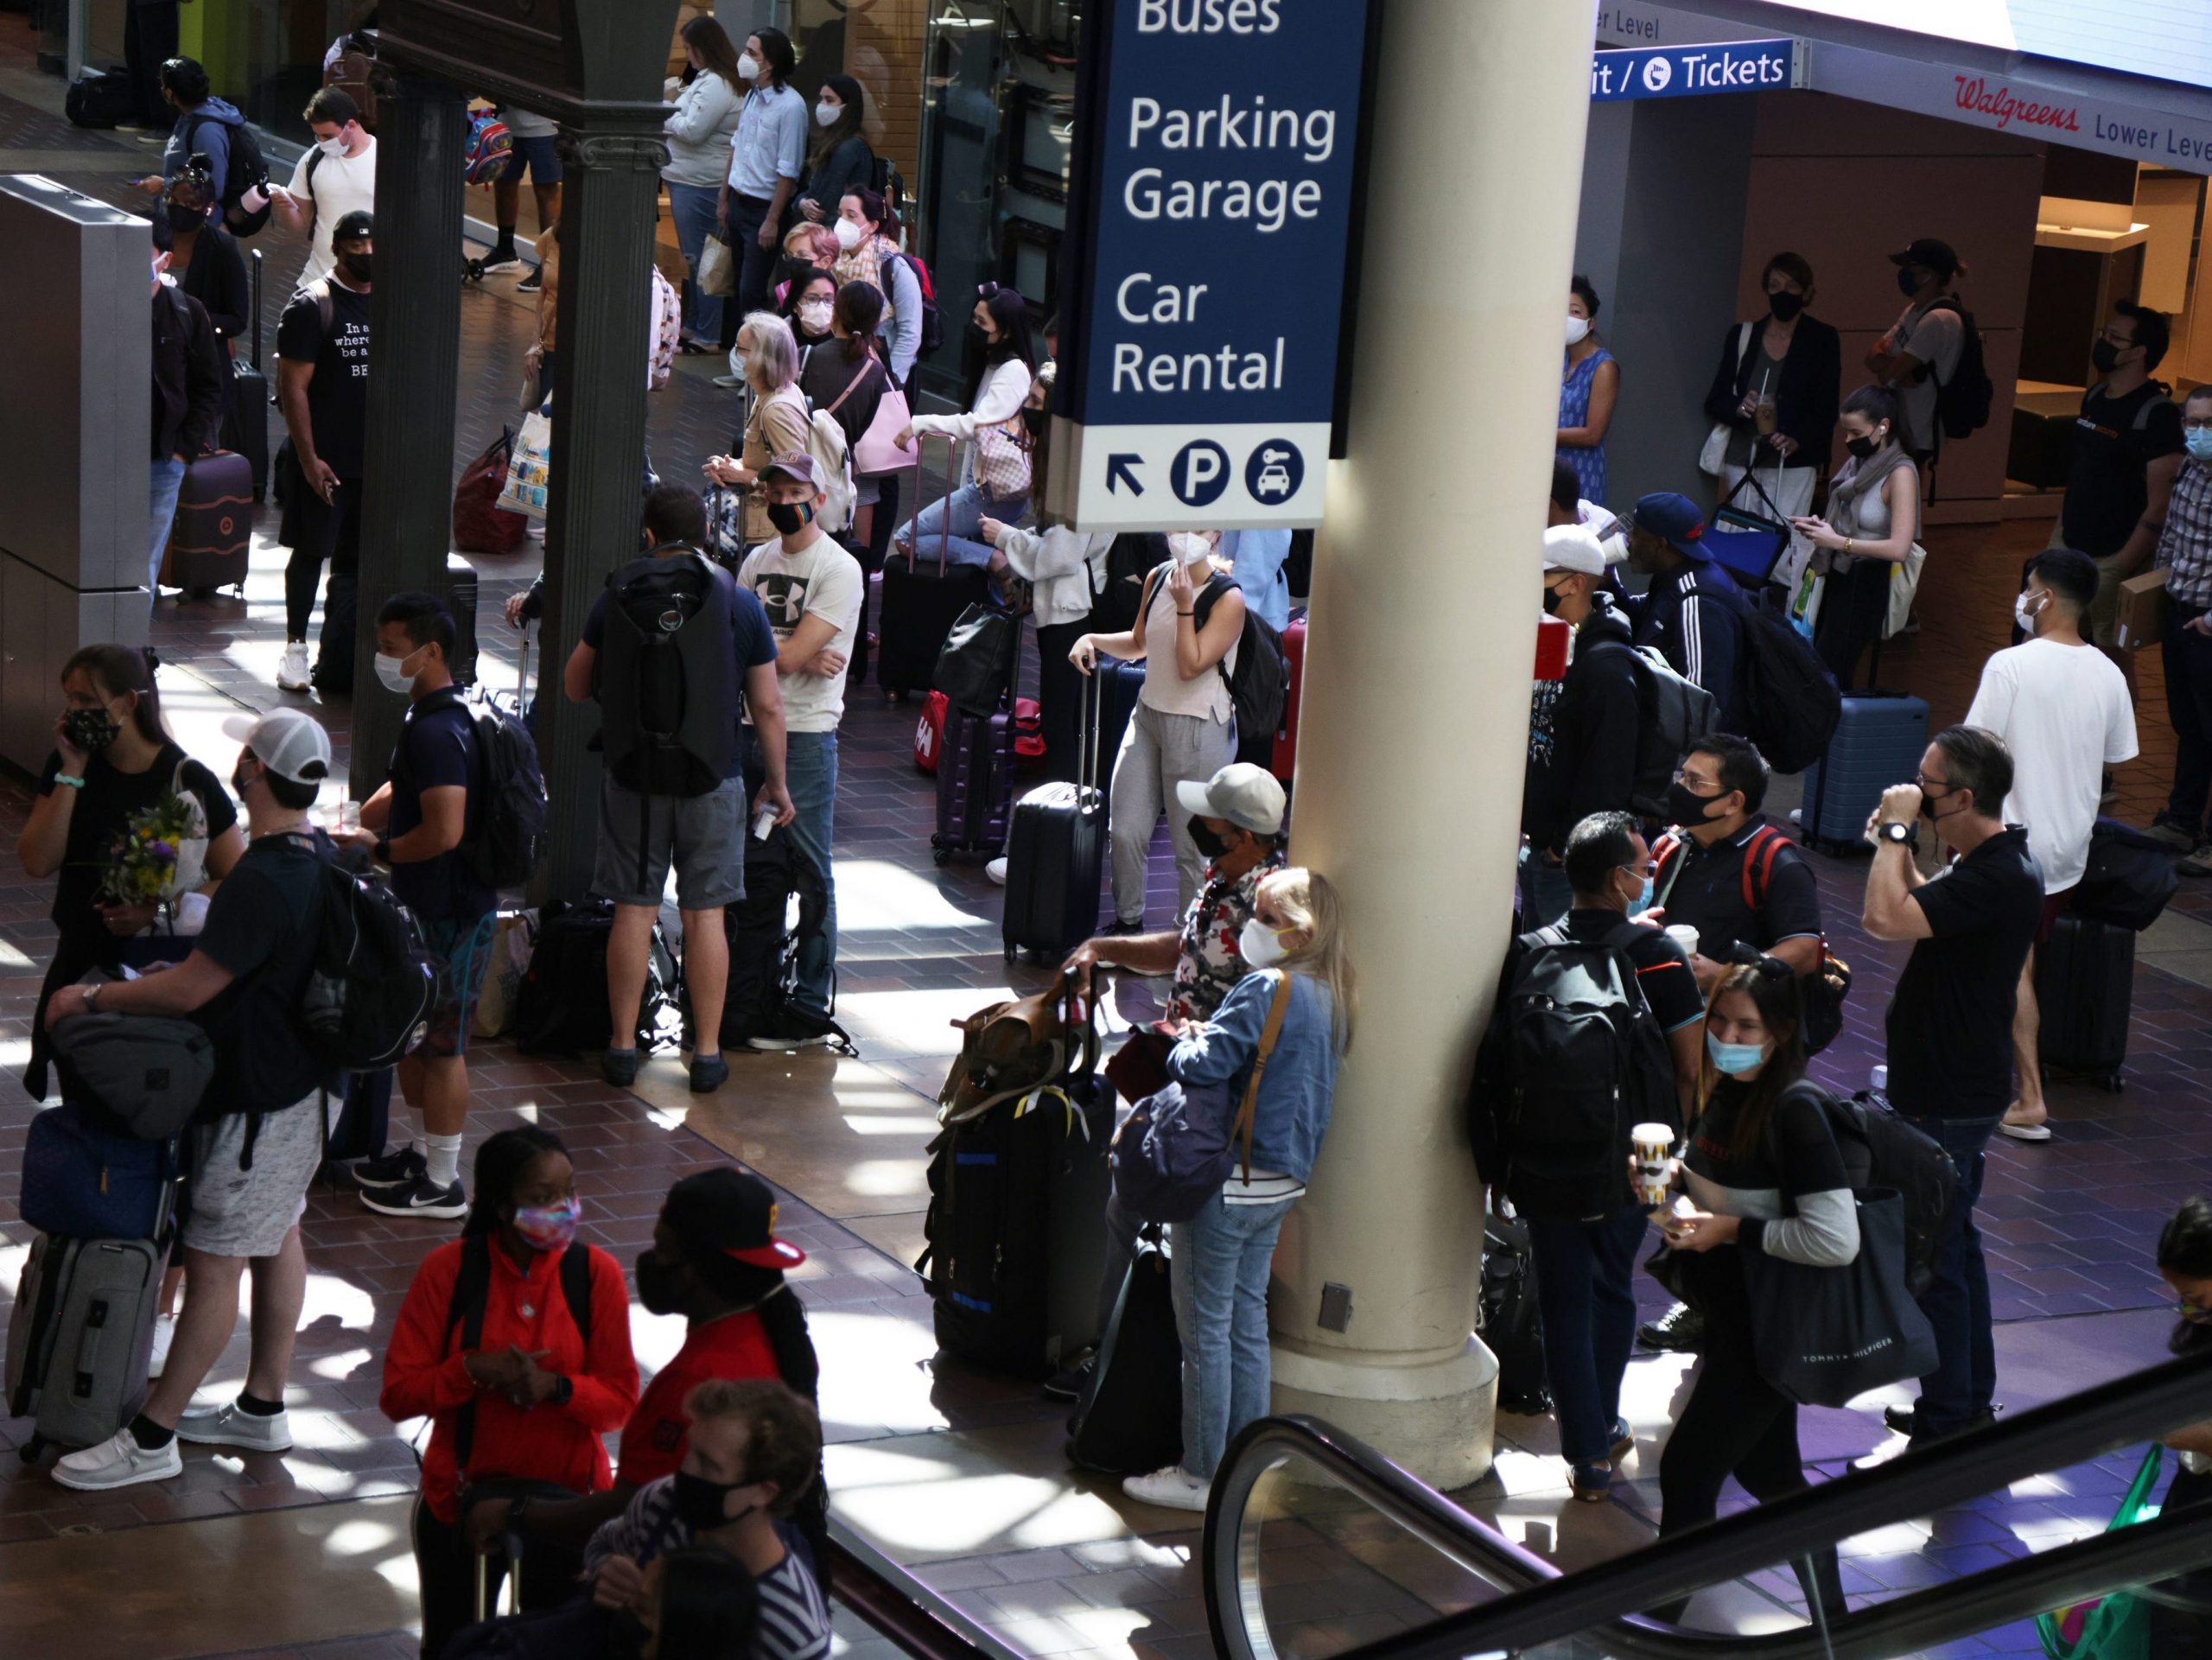 Passengers wait at the concourse of Union Station September 3, 2021 in Washington, DC, as the CDC warned that the unvaccinated should stay home.